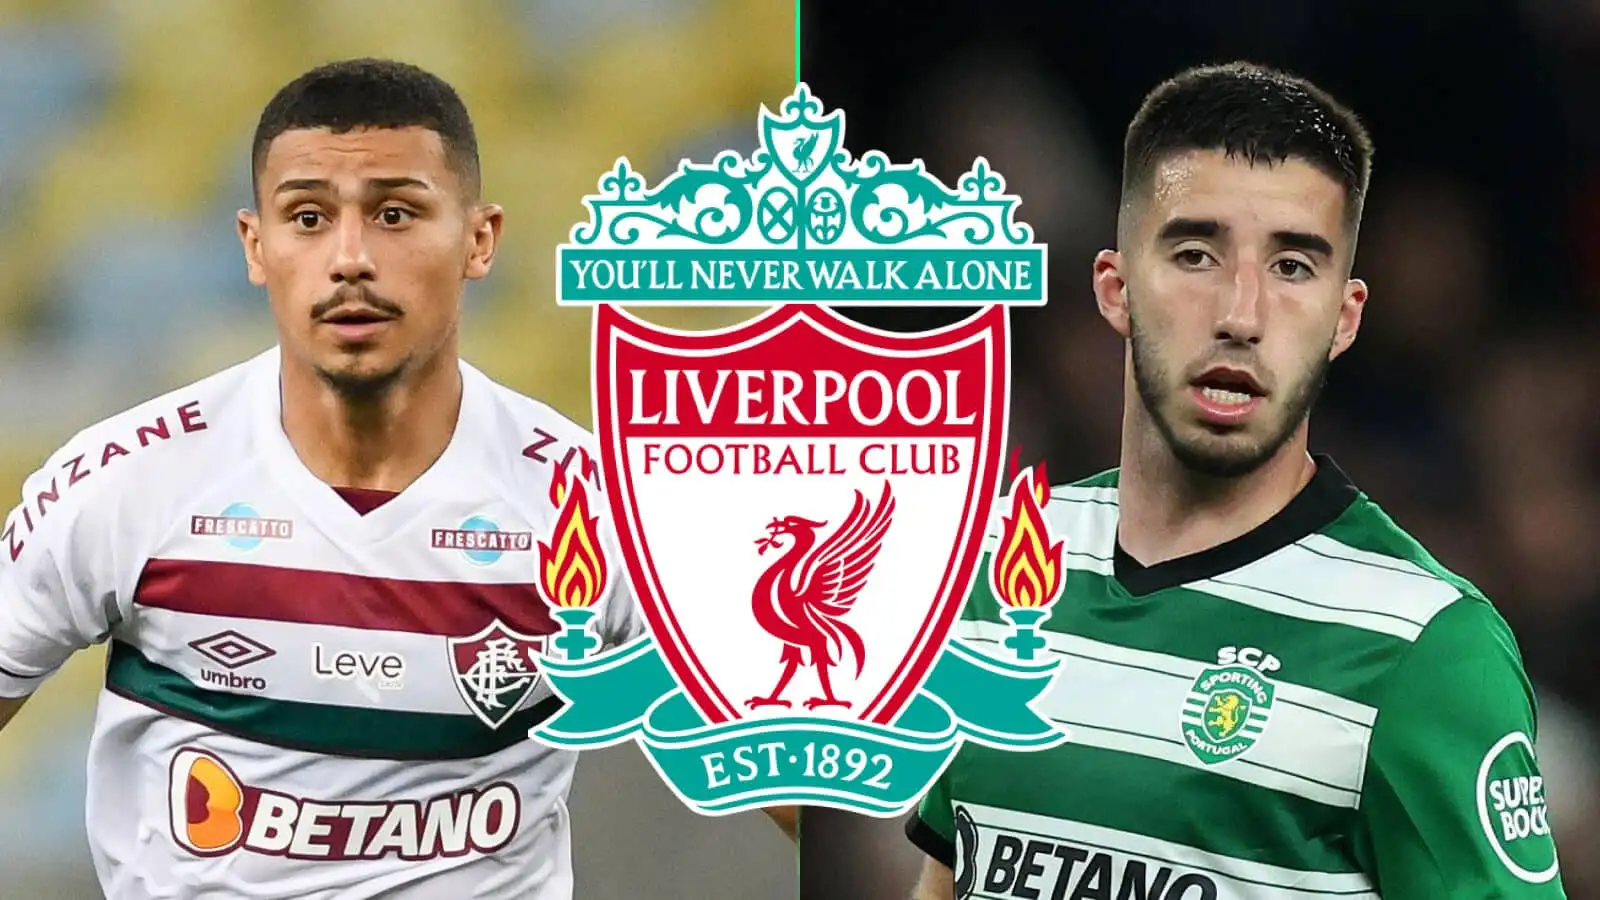 Andre and Goncalo Inacio have both been linked with moves to Liverpool